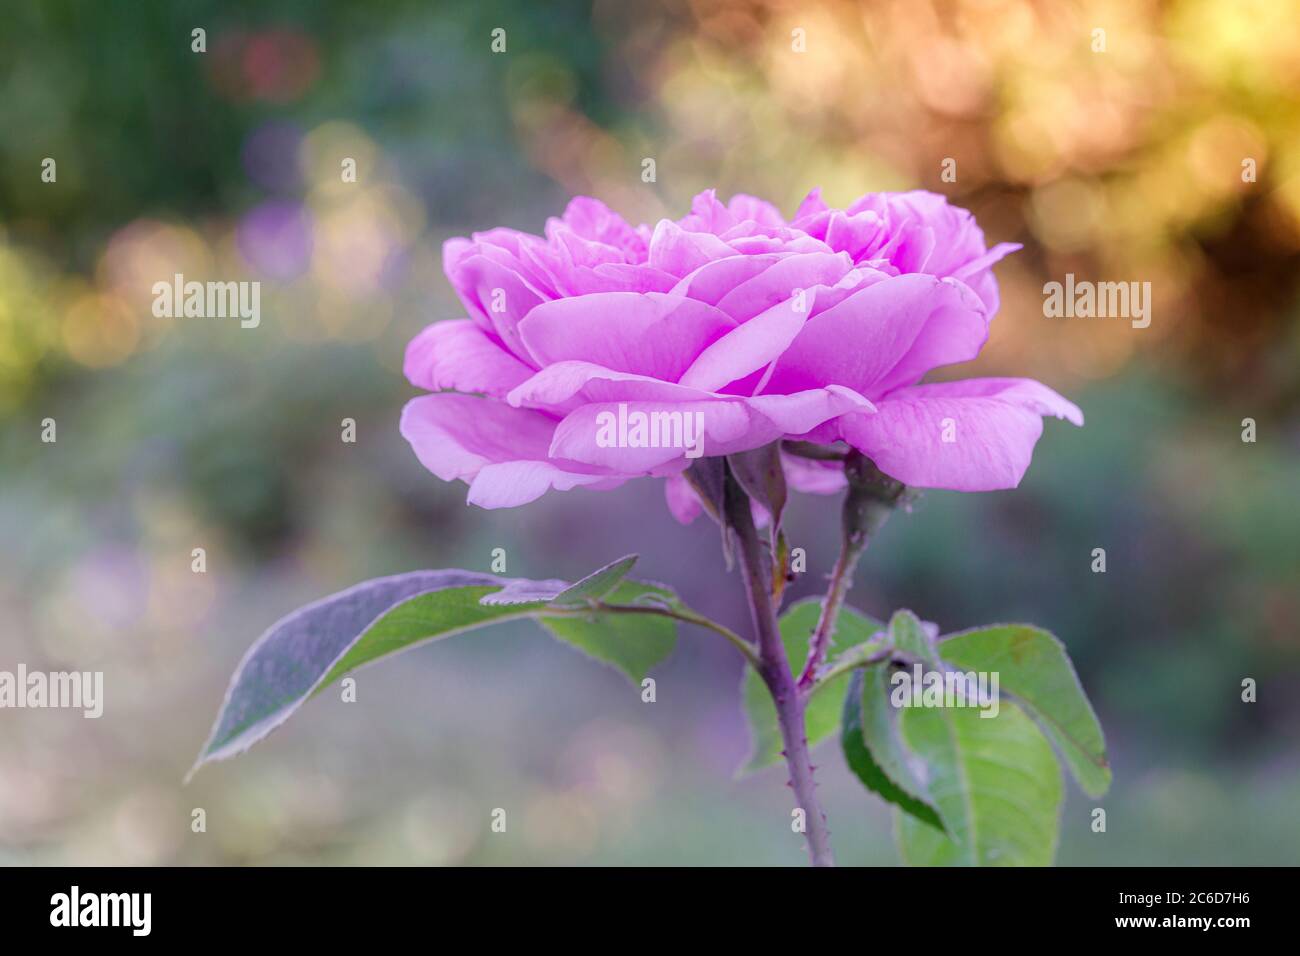 lilac rose head and steam with blurred background in a garden Stock Photo